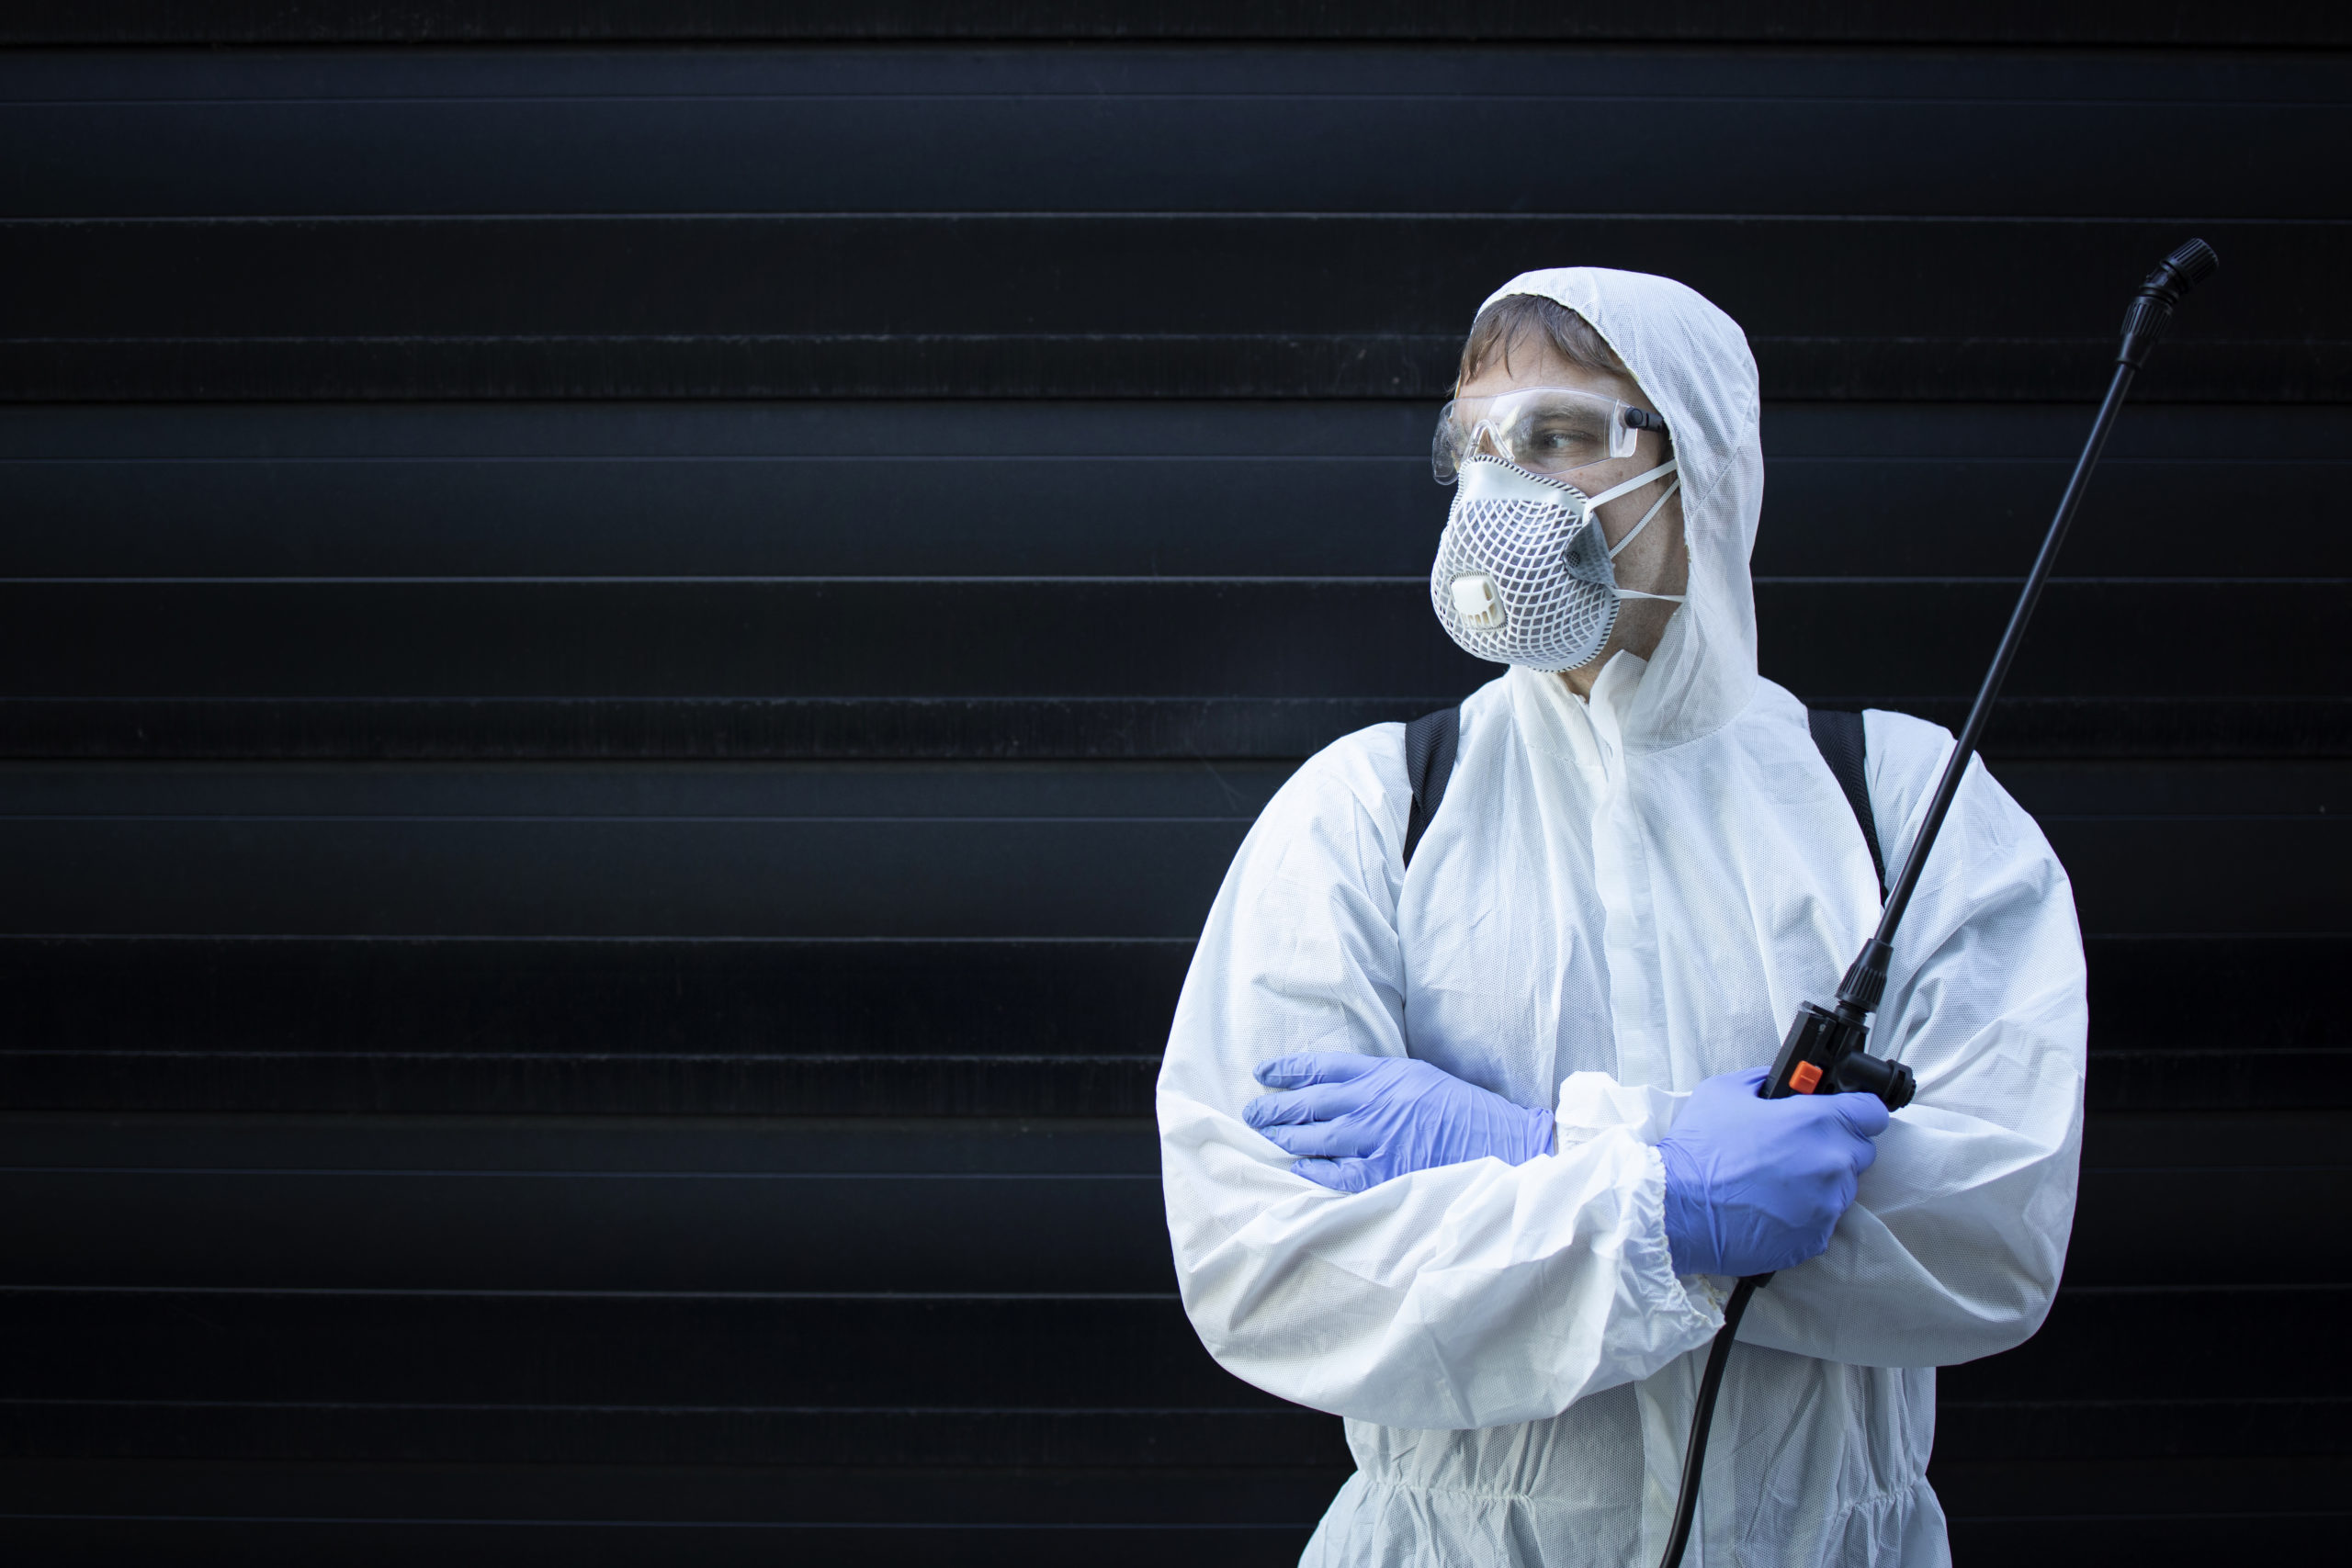 Portrait of professional exterminator holding sprayer with chemicals for pest control.